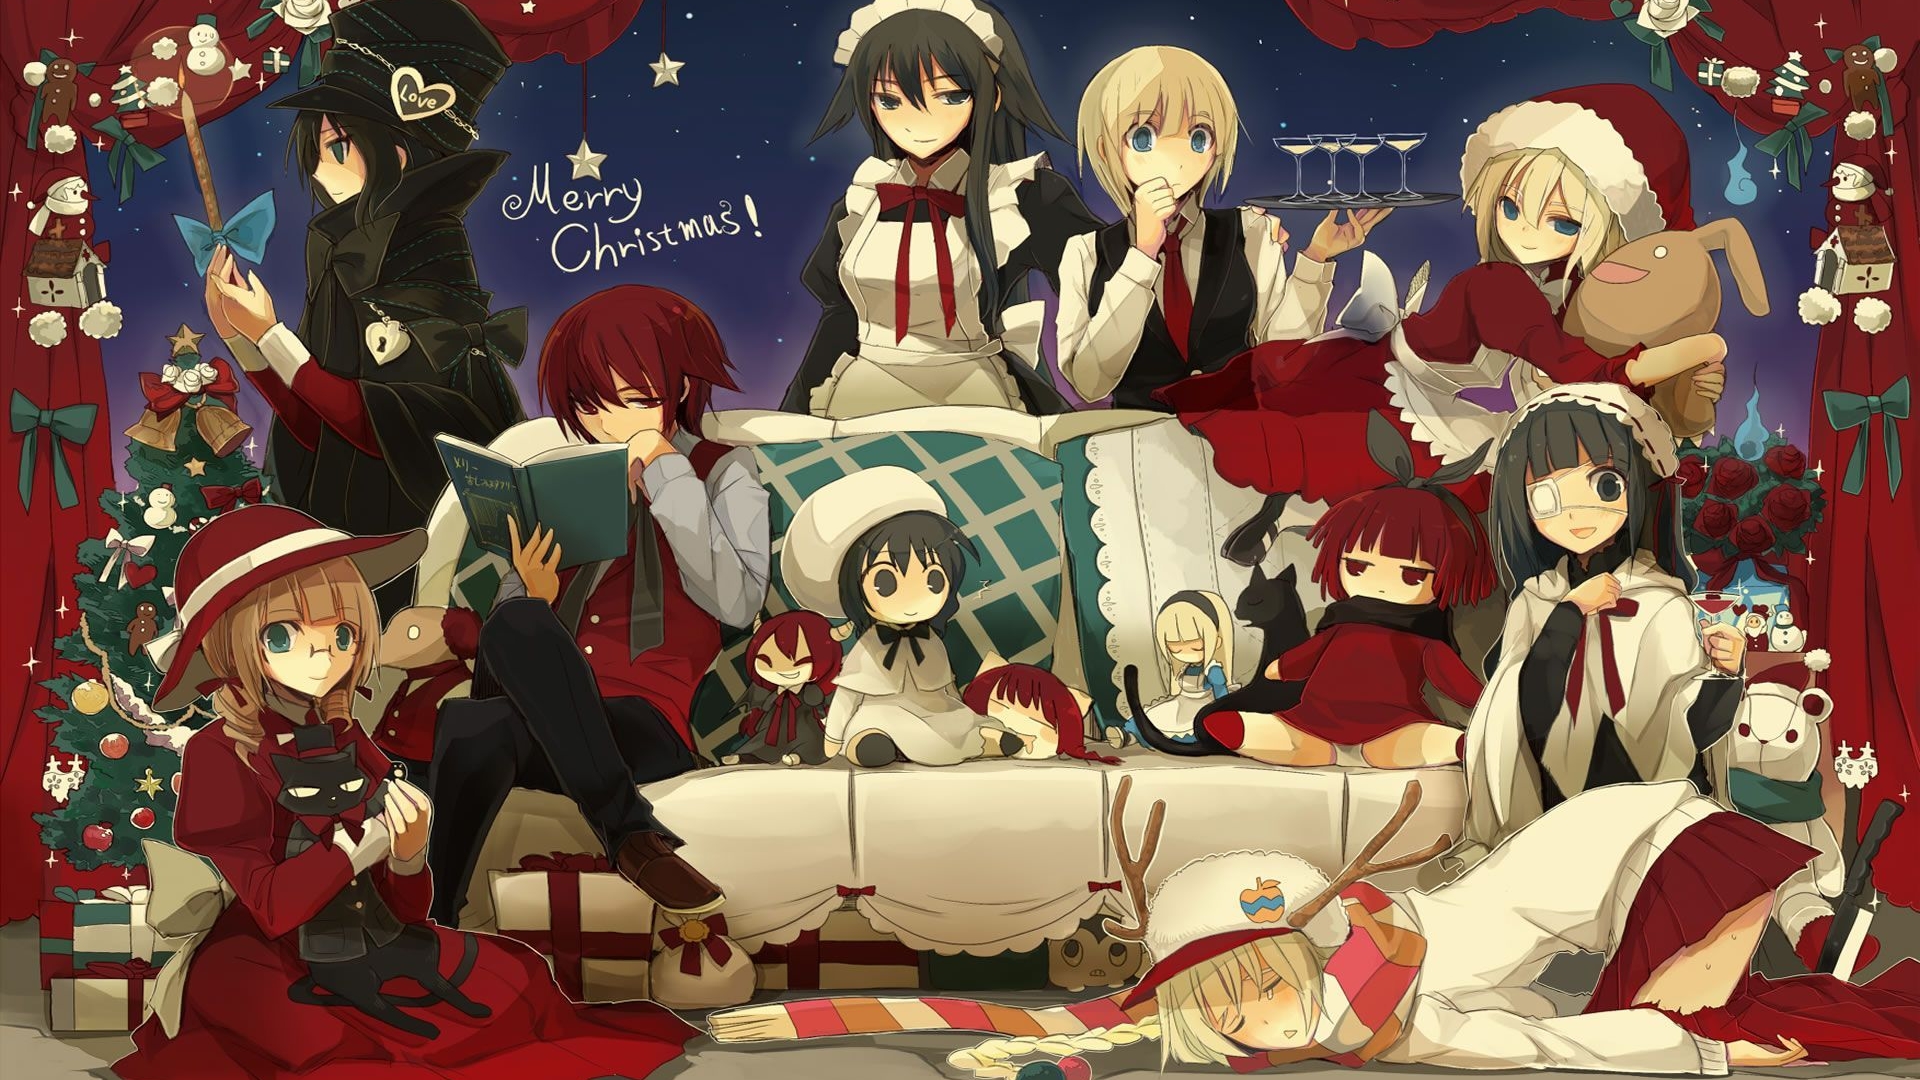 Free download Merry Christmas Anime Wallpapers Top Merry Christmas.